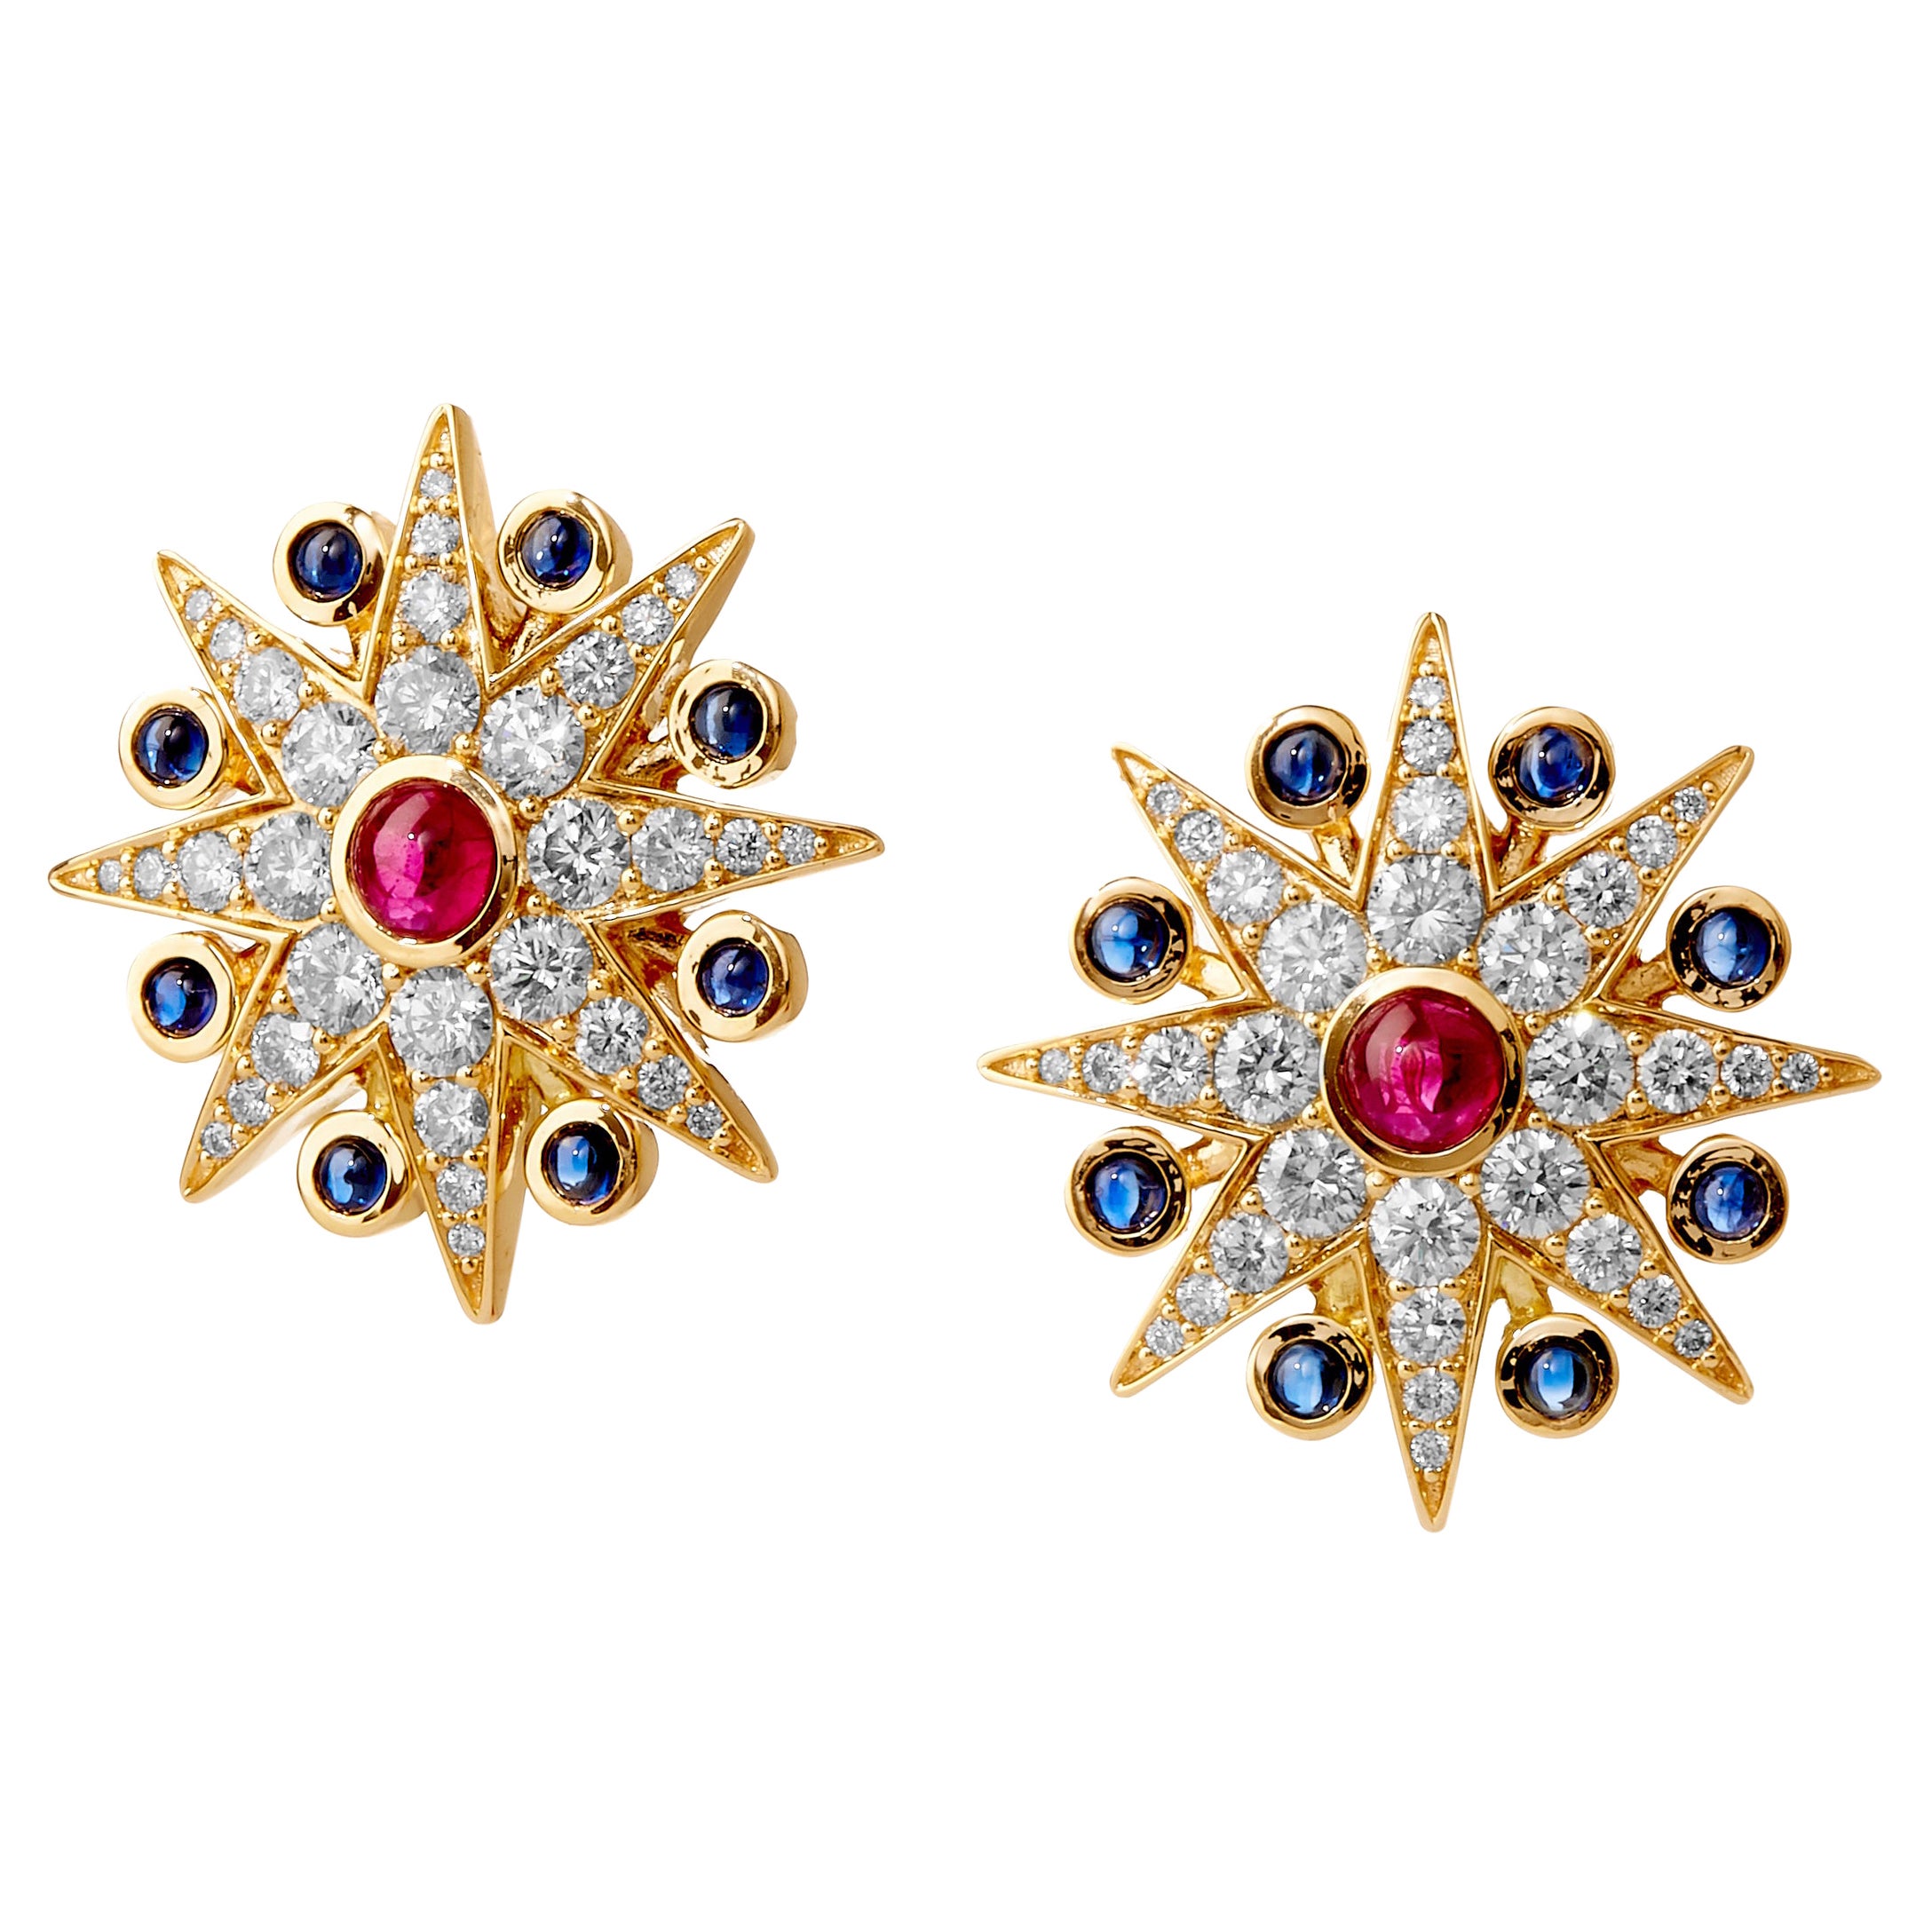 Syna Cosmic Earrings with Rubies, Blue Sapphires and Diamonds